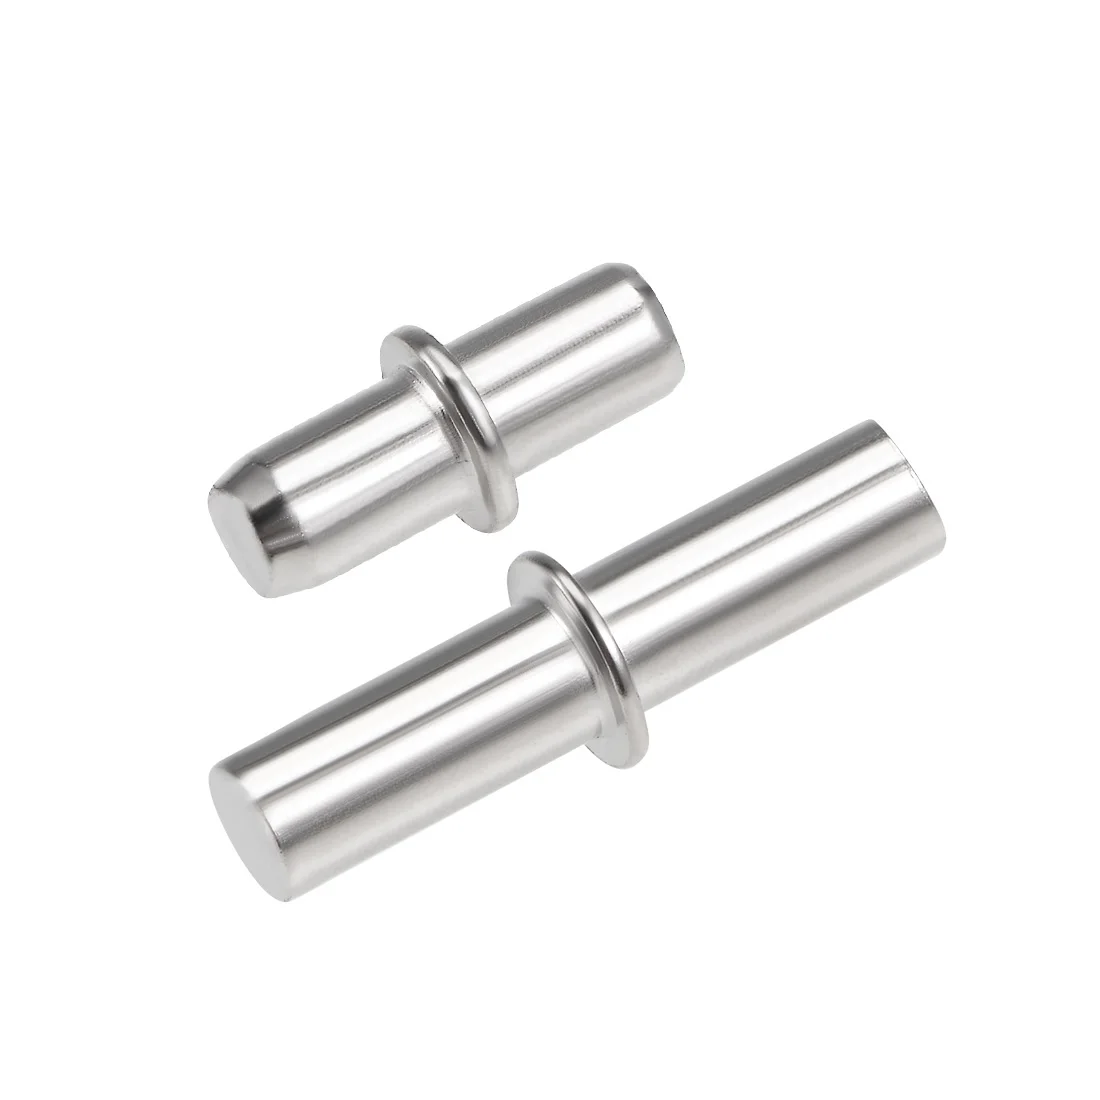 PACK OF 20 GLASS SHELF SUPPORTS PLUG IN STEEL PEGS PINS Ø5 mm HOLE 